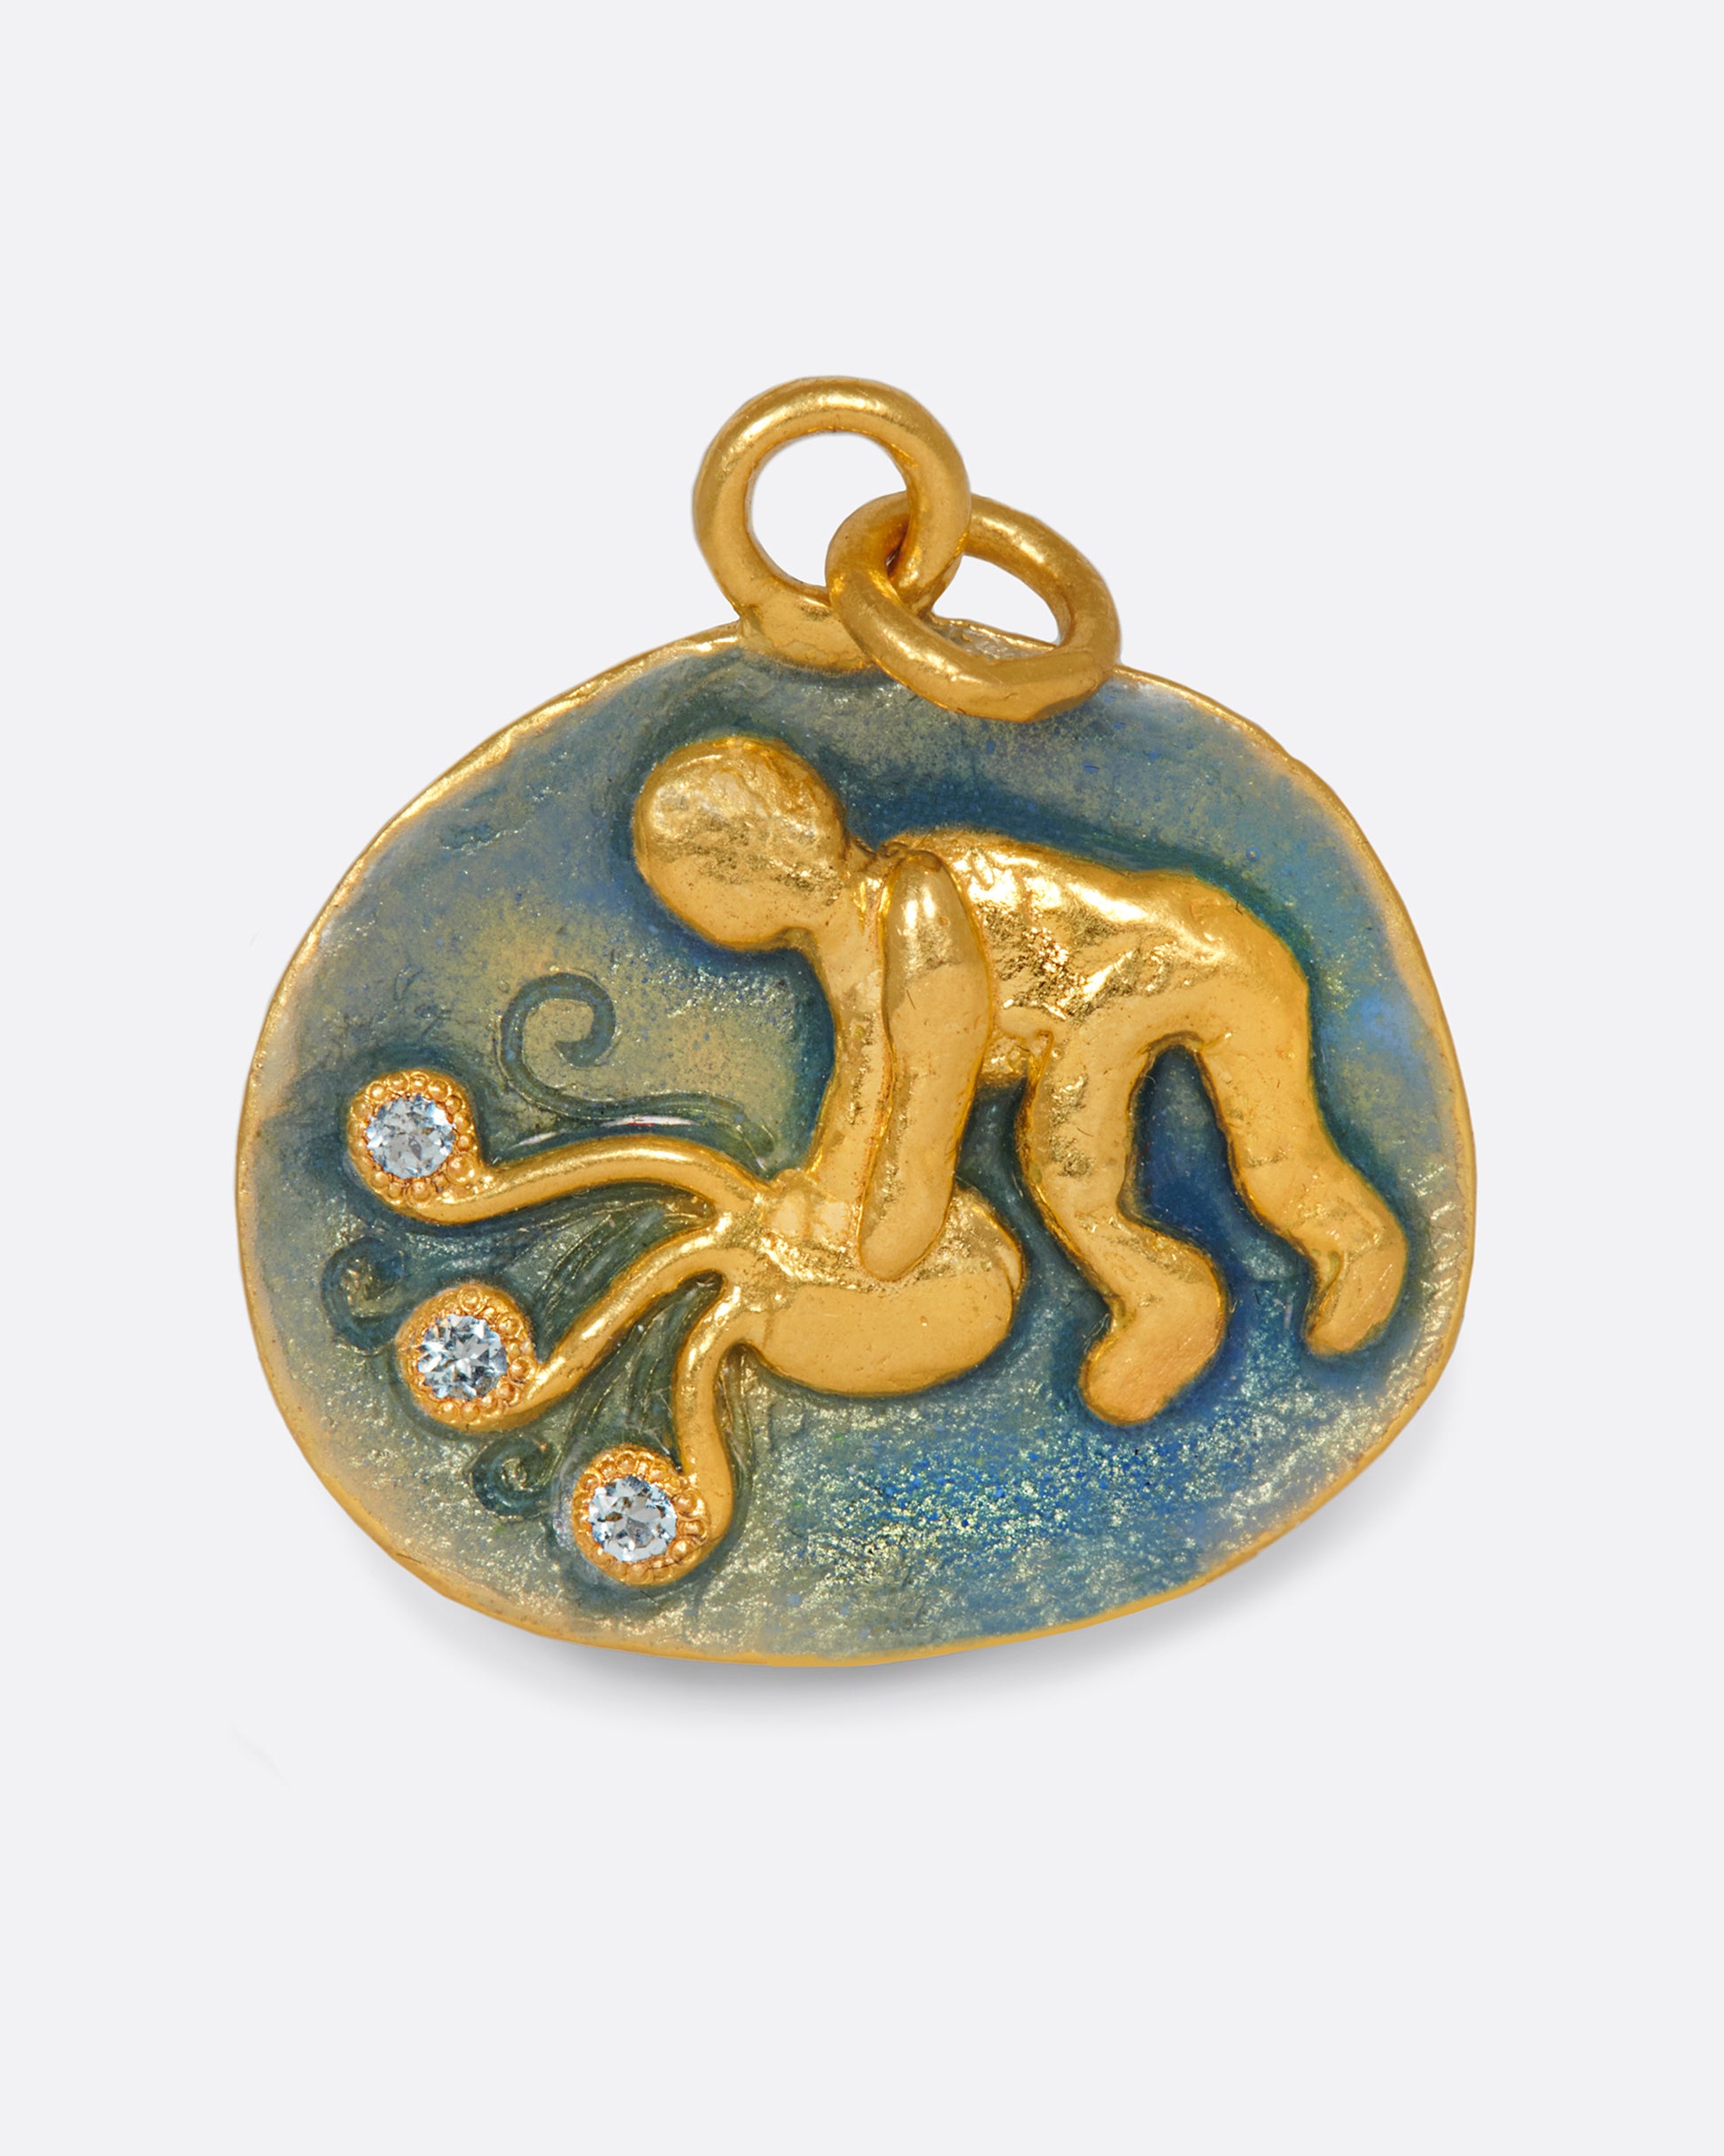 A hand formed medallion pendant with an Aquarius icon, pouring water dotted with aquamarines.